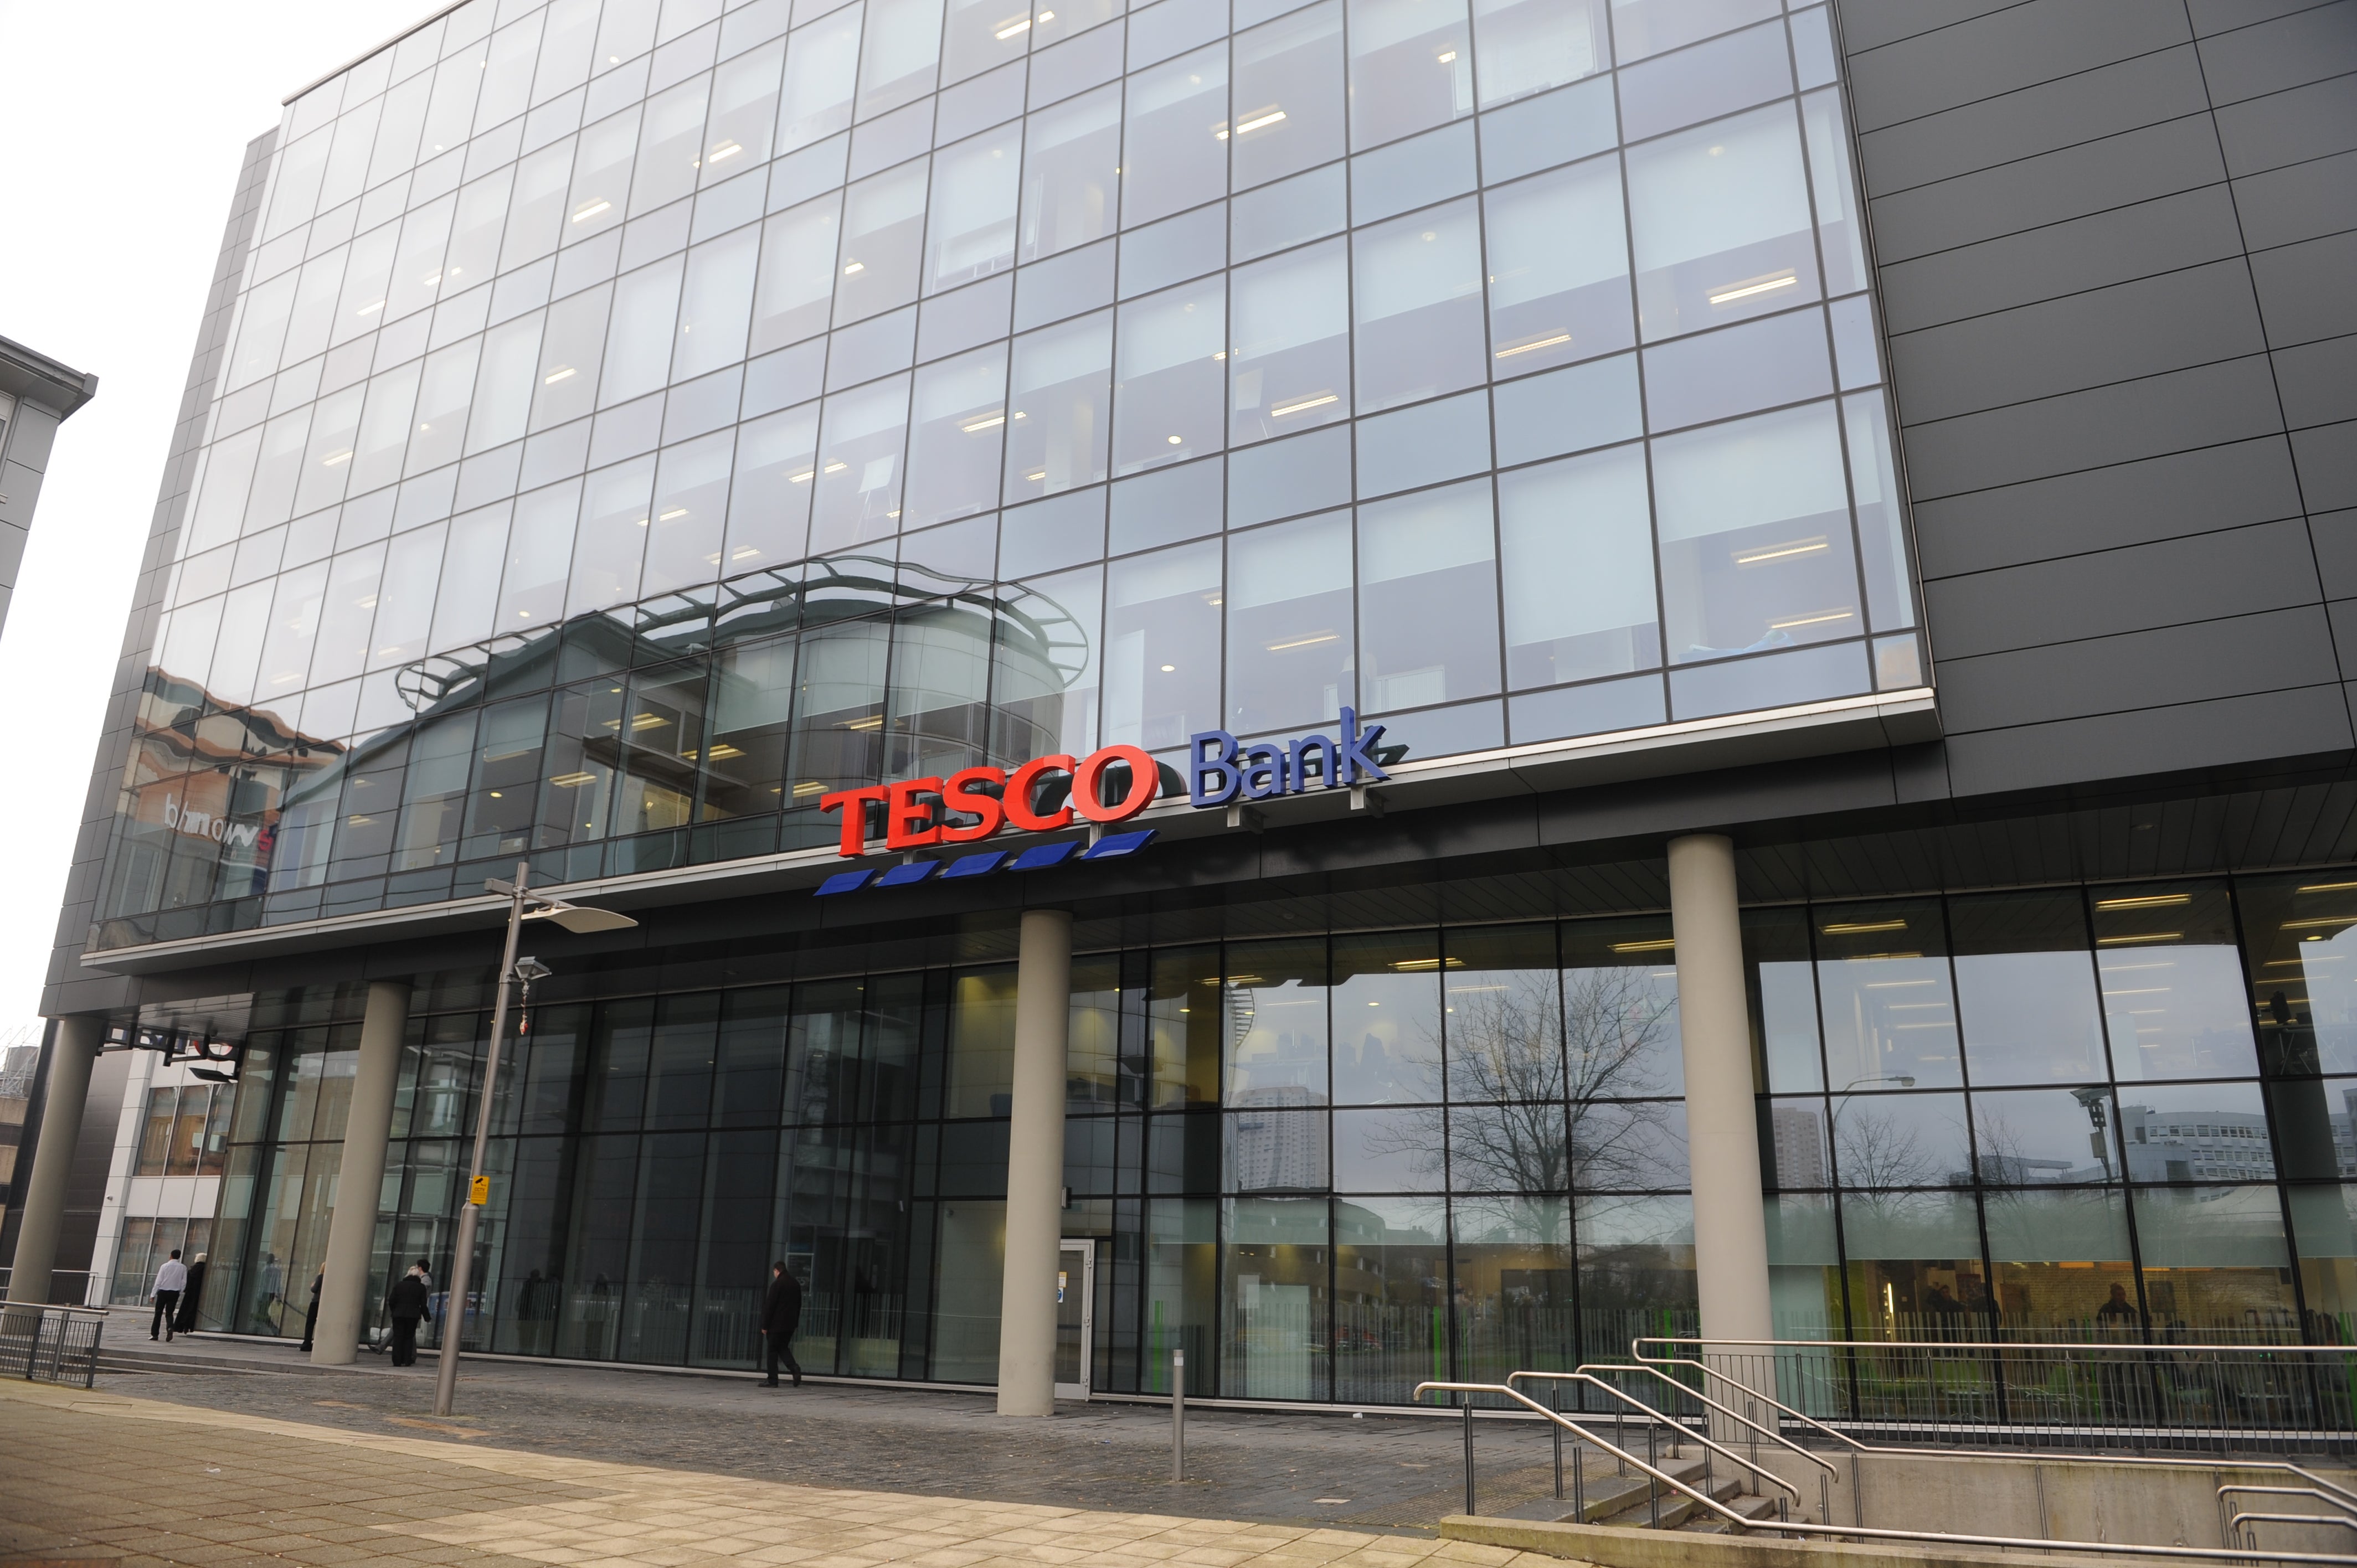 Tesco Bank Hack – 6 vital questions that need answering